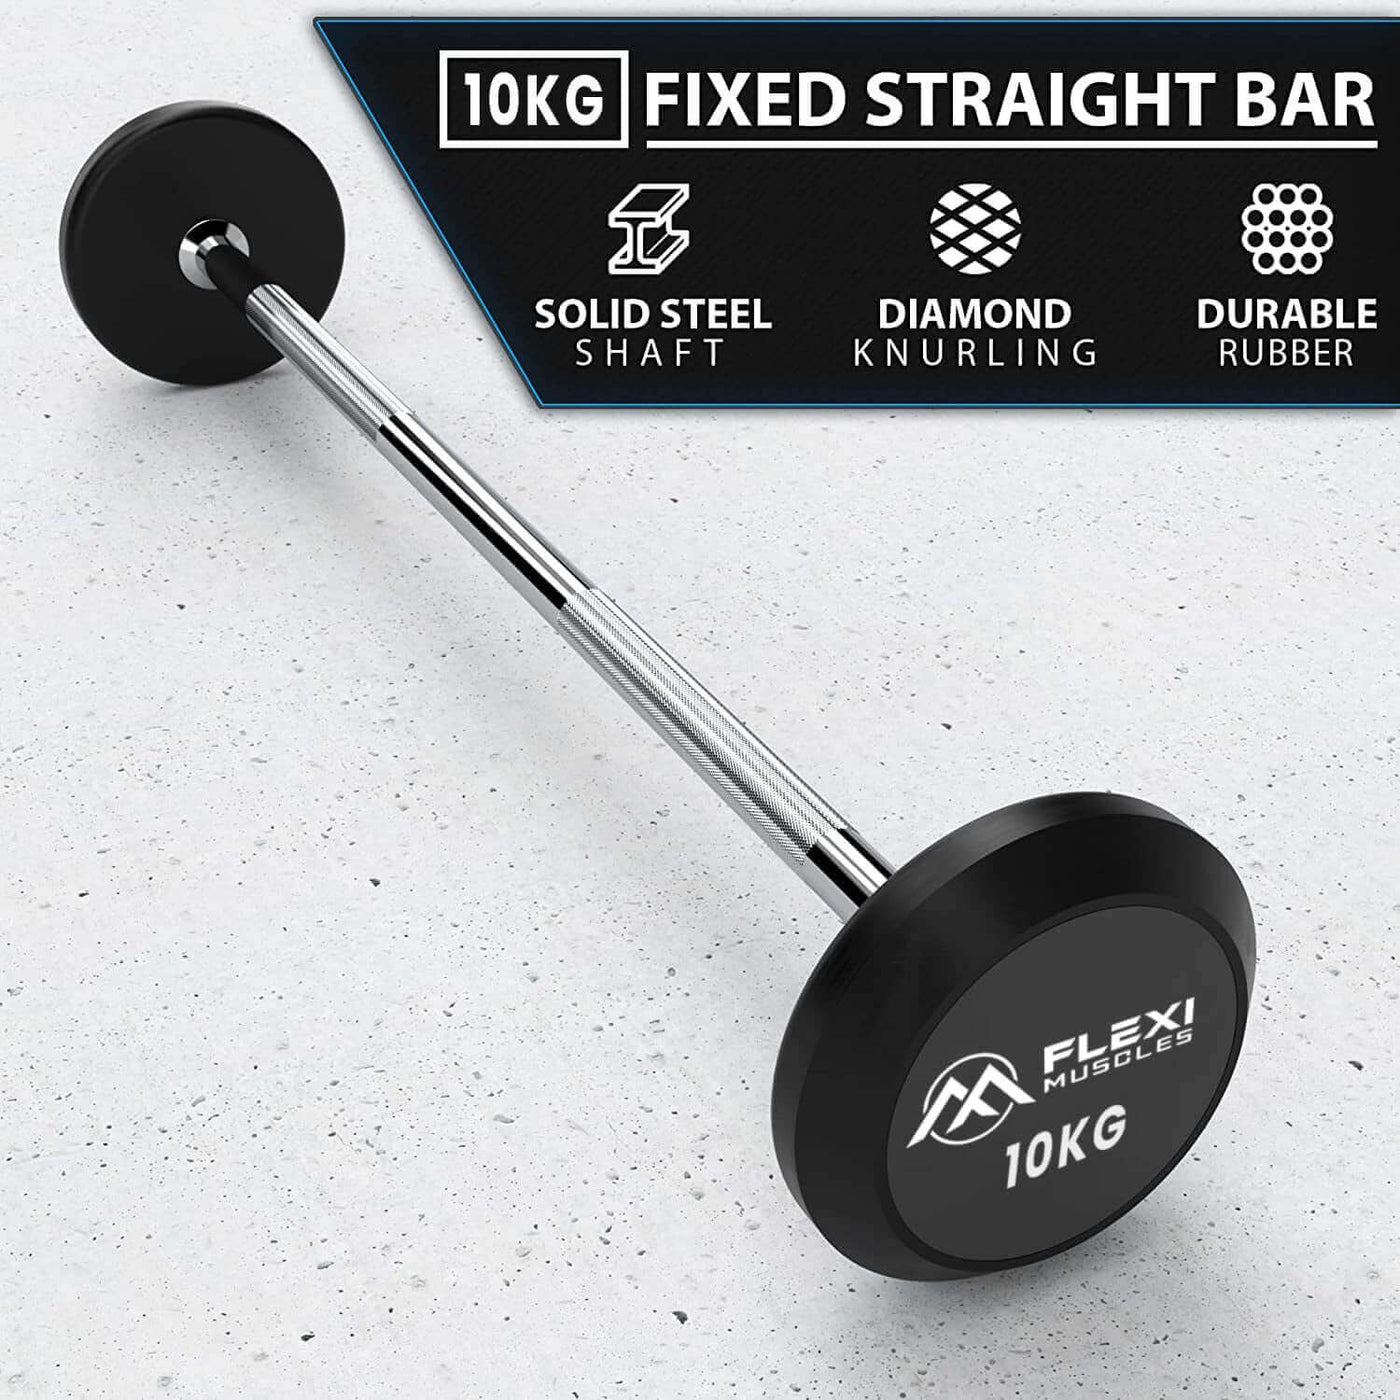 Flexi Muscles – Rubber Fixed Barbell, Pre-Loaded Weights Straight Bar for Strength Training & Weightlifting.